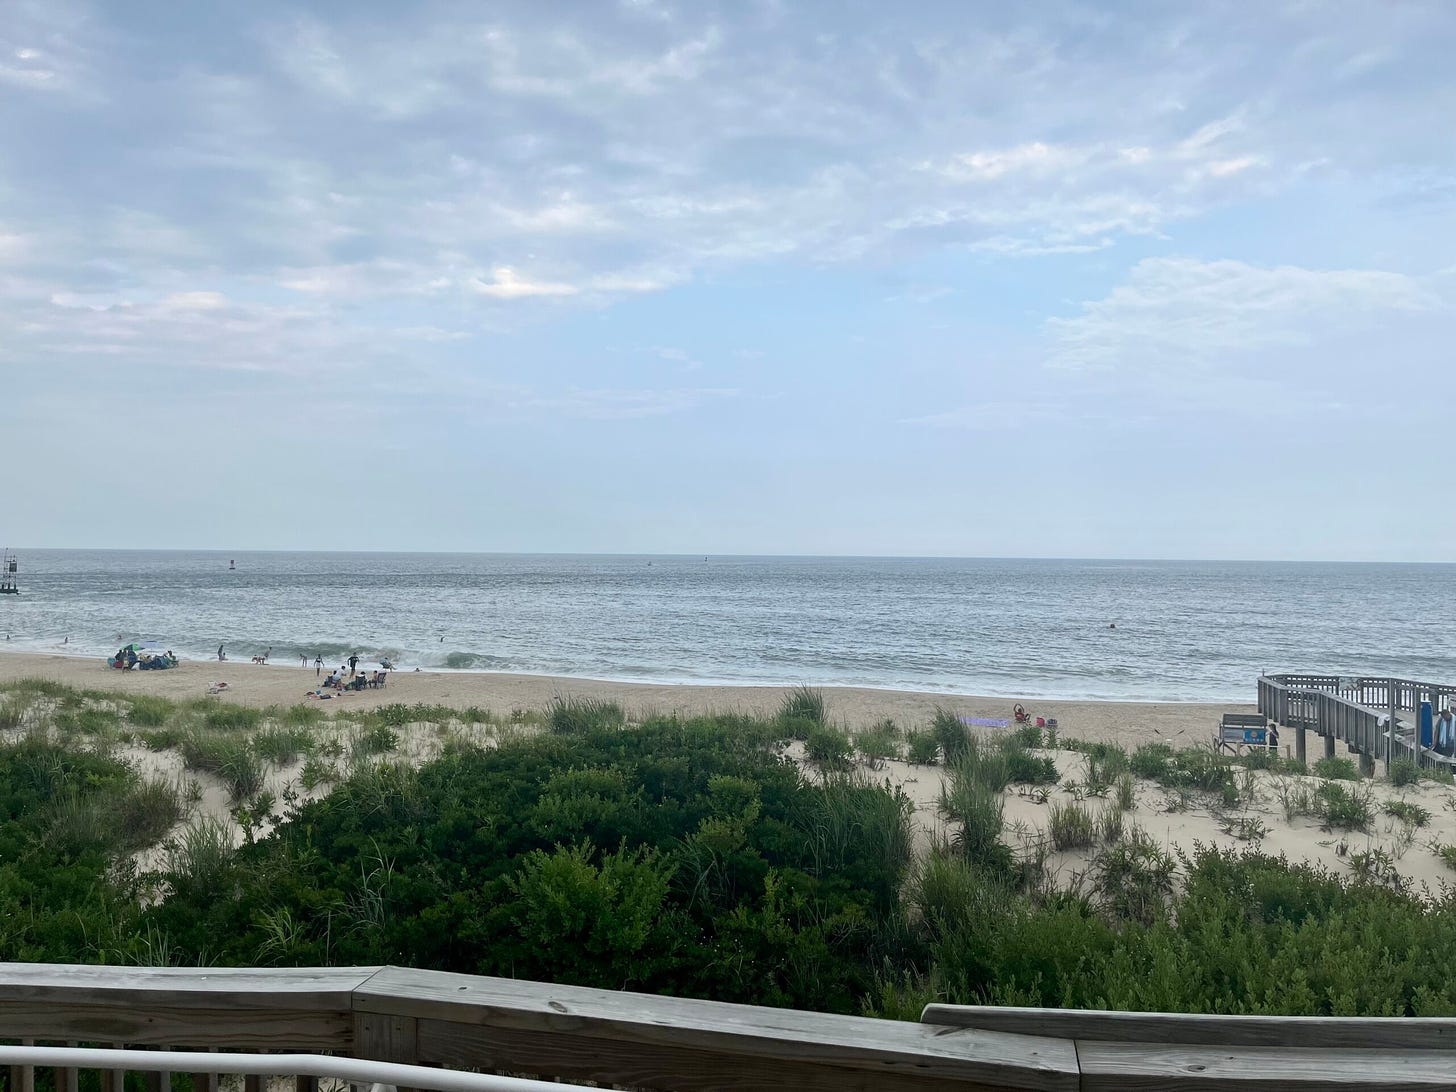 View from the deck of Big Chill at the Delaware Seashore State Park - Oceanfront Restaurants in Bethany Beach